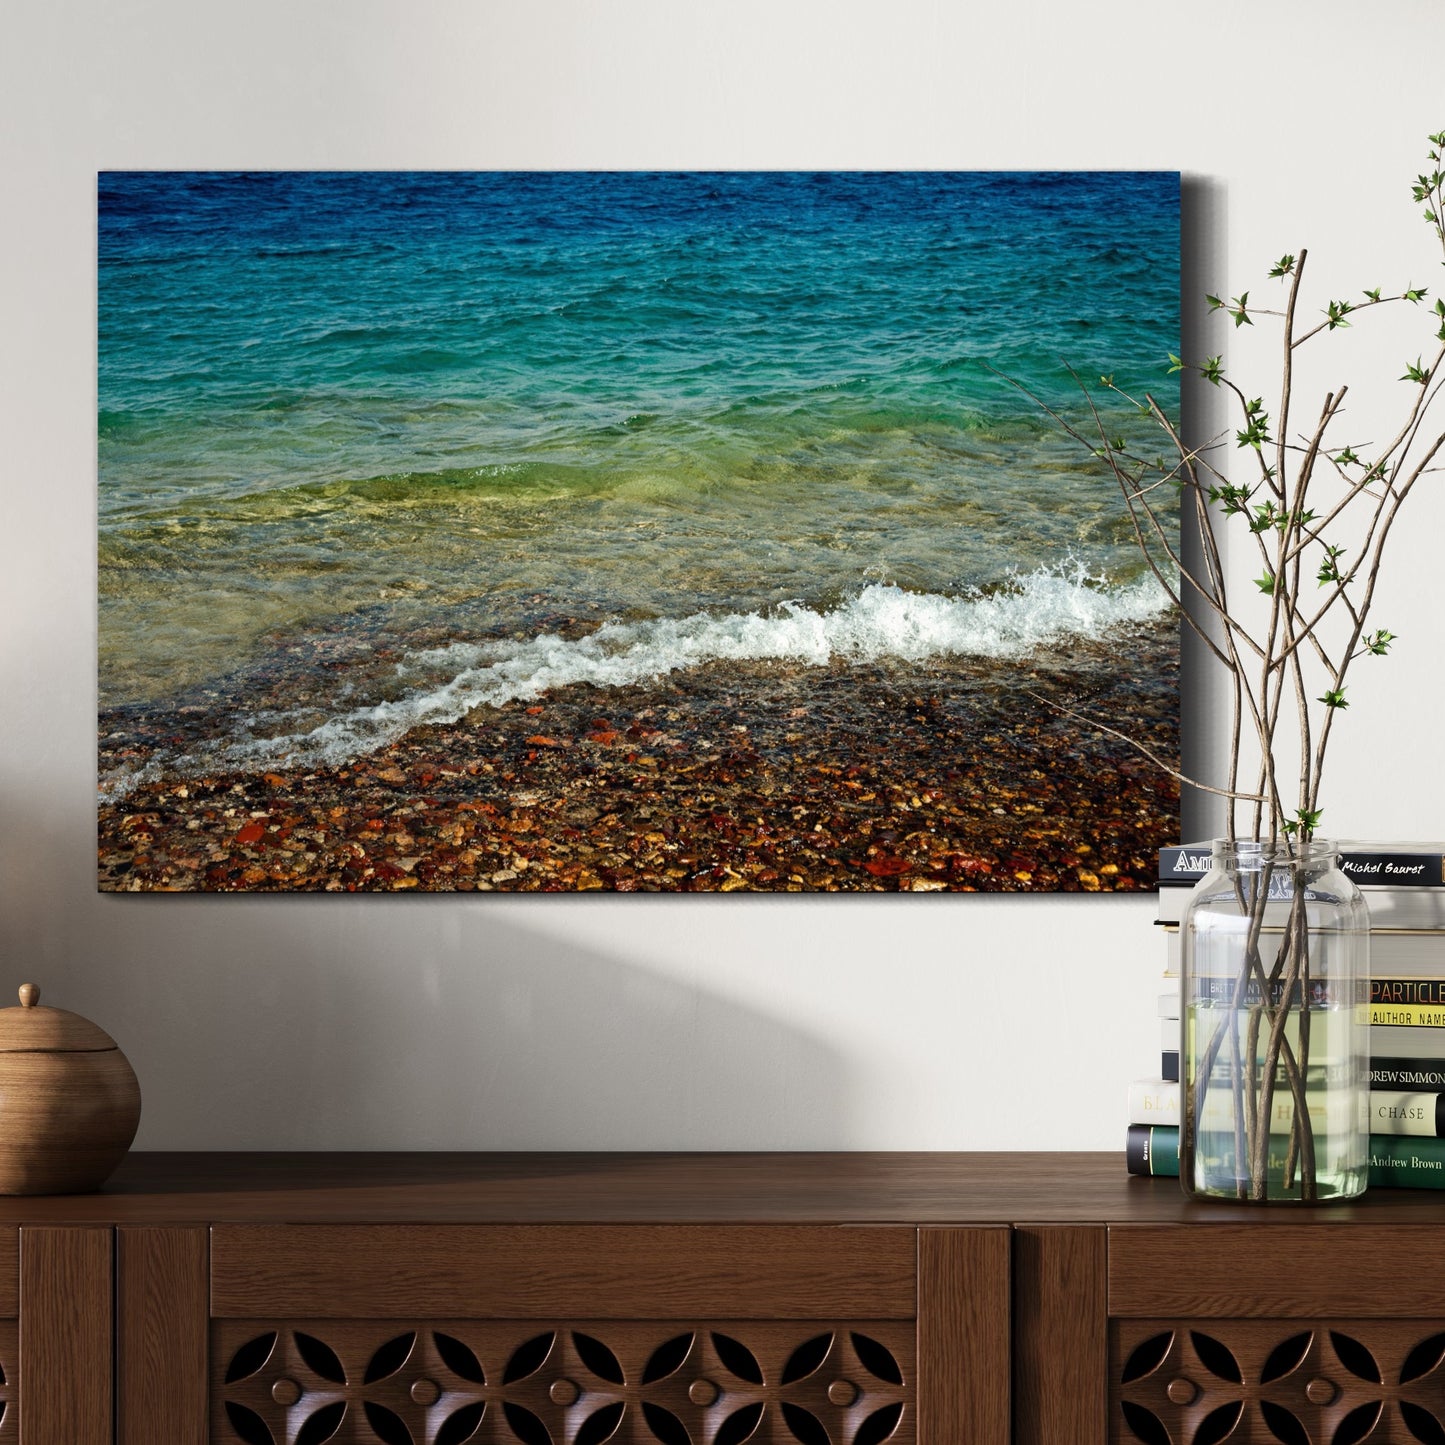 Red Sea Rainbow by Yehoshua Halevi Photograph - Acrylic Print (French Cleat Hanging)